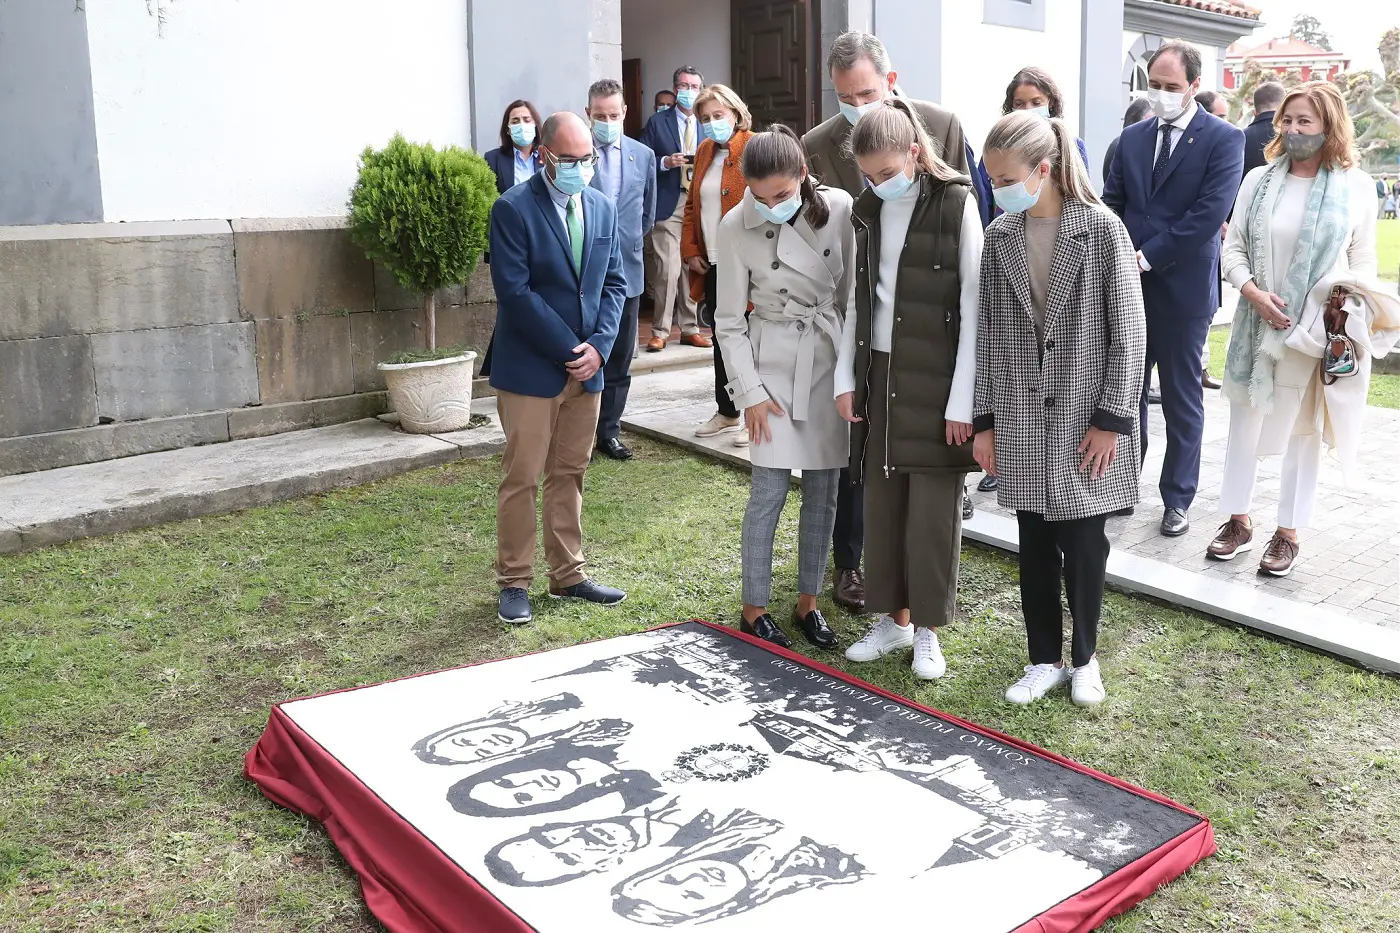 Spain royals saw their artistic work during the visit to Asturias